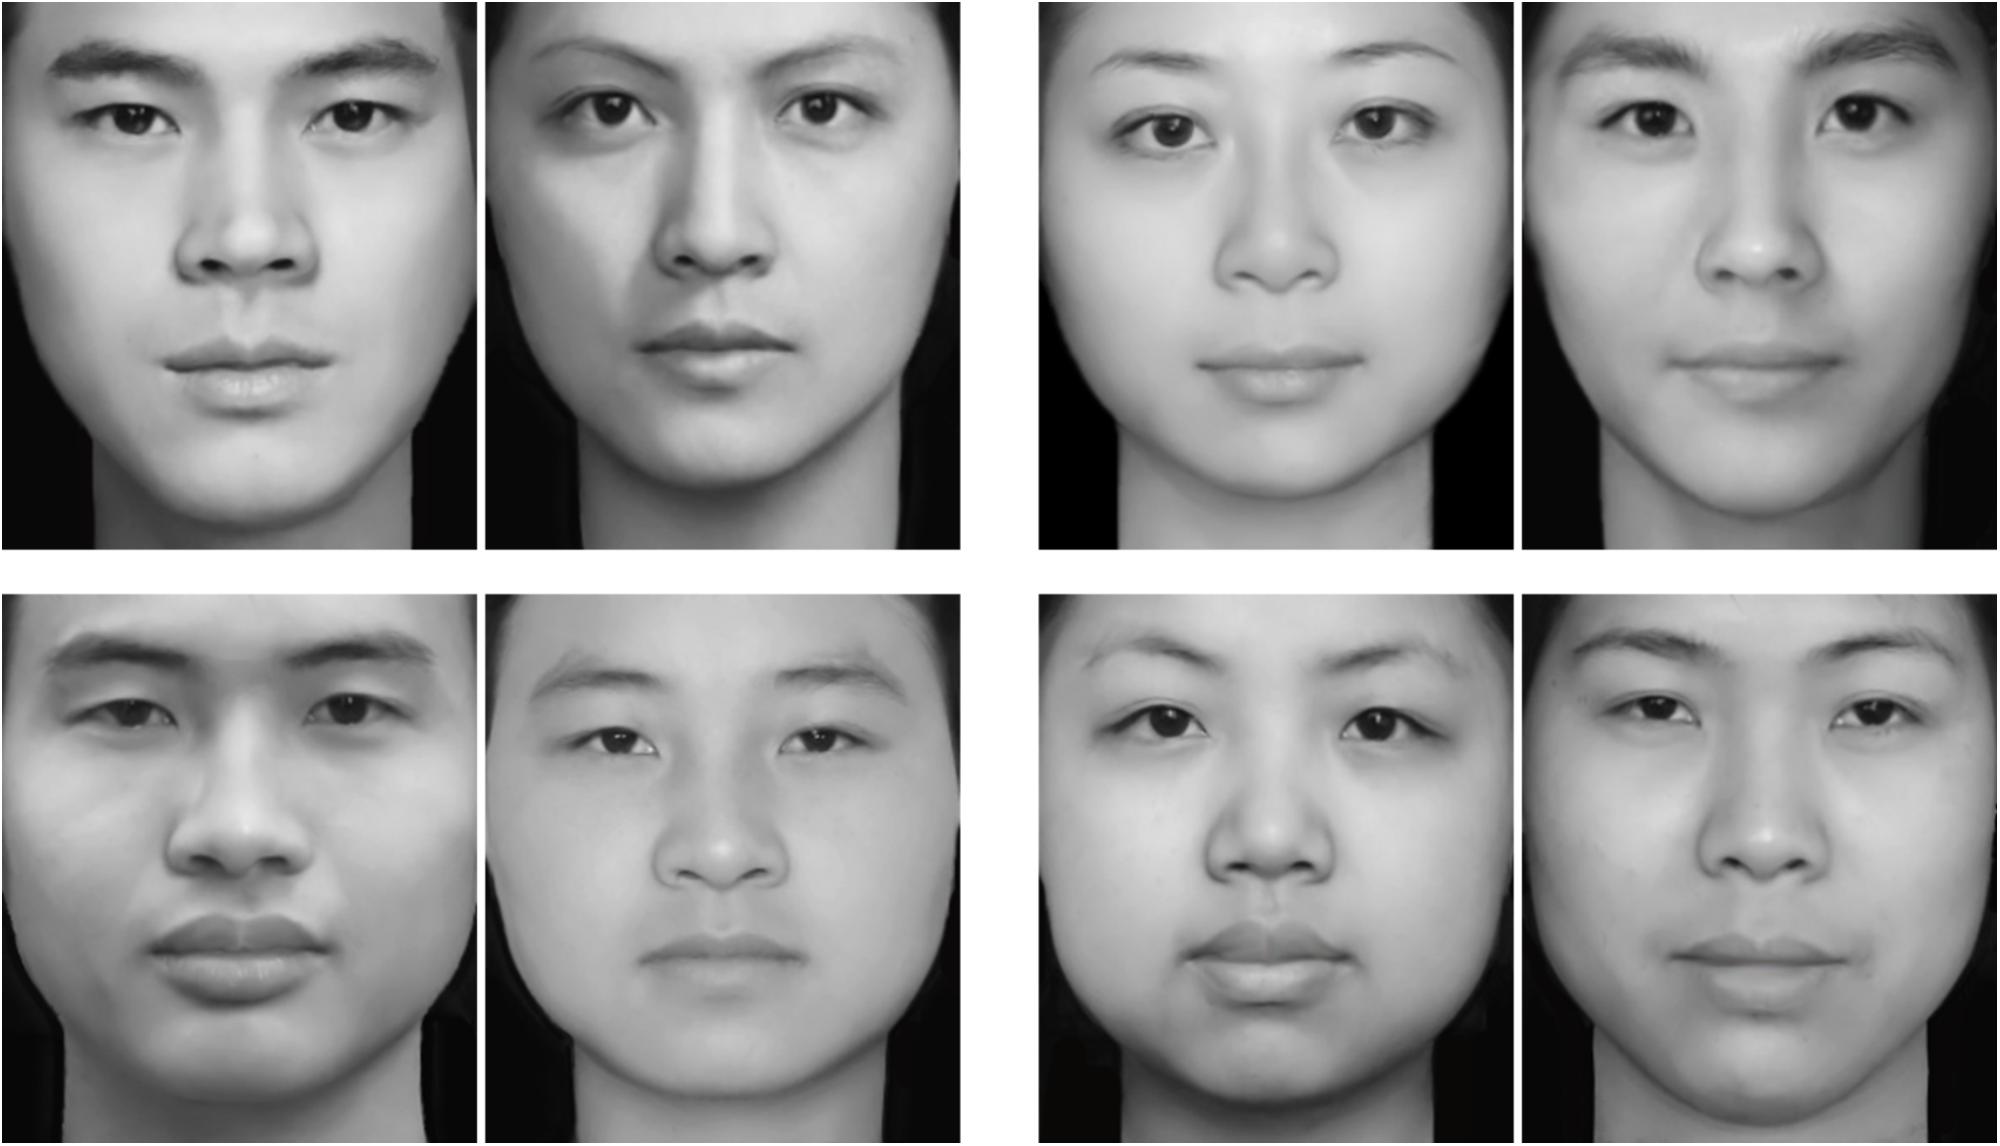 The Face of Sexualization: Faces Wearing Makeup are Processed Less  Configurally than Faces Without Makeup - International Review of Social  Psychology